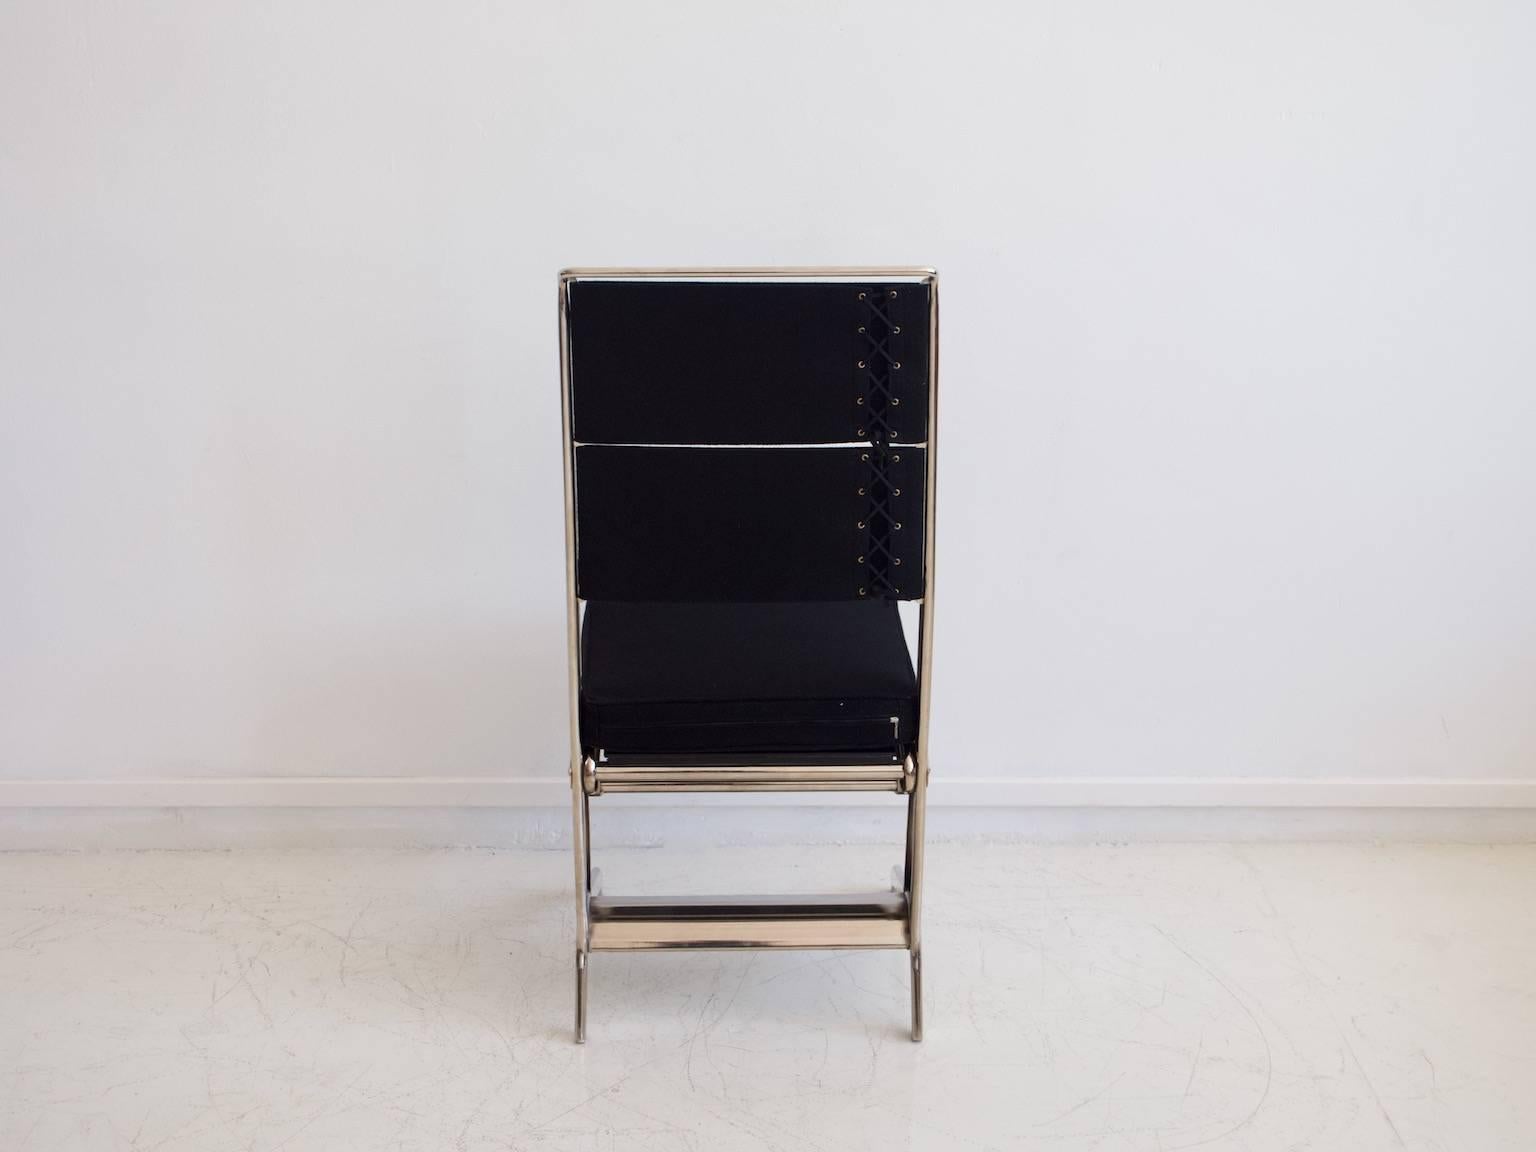 20th Century Jean Prouvé Folding Chair with Steel Frame and Black Upholstery